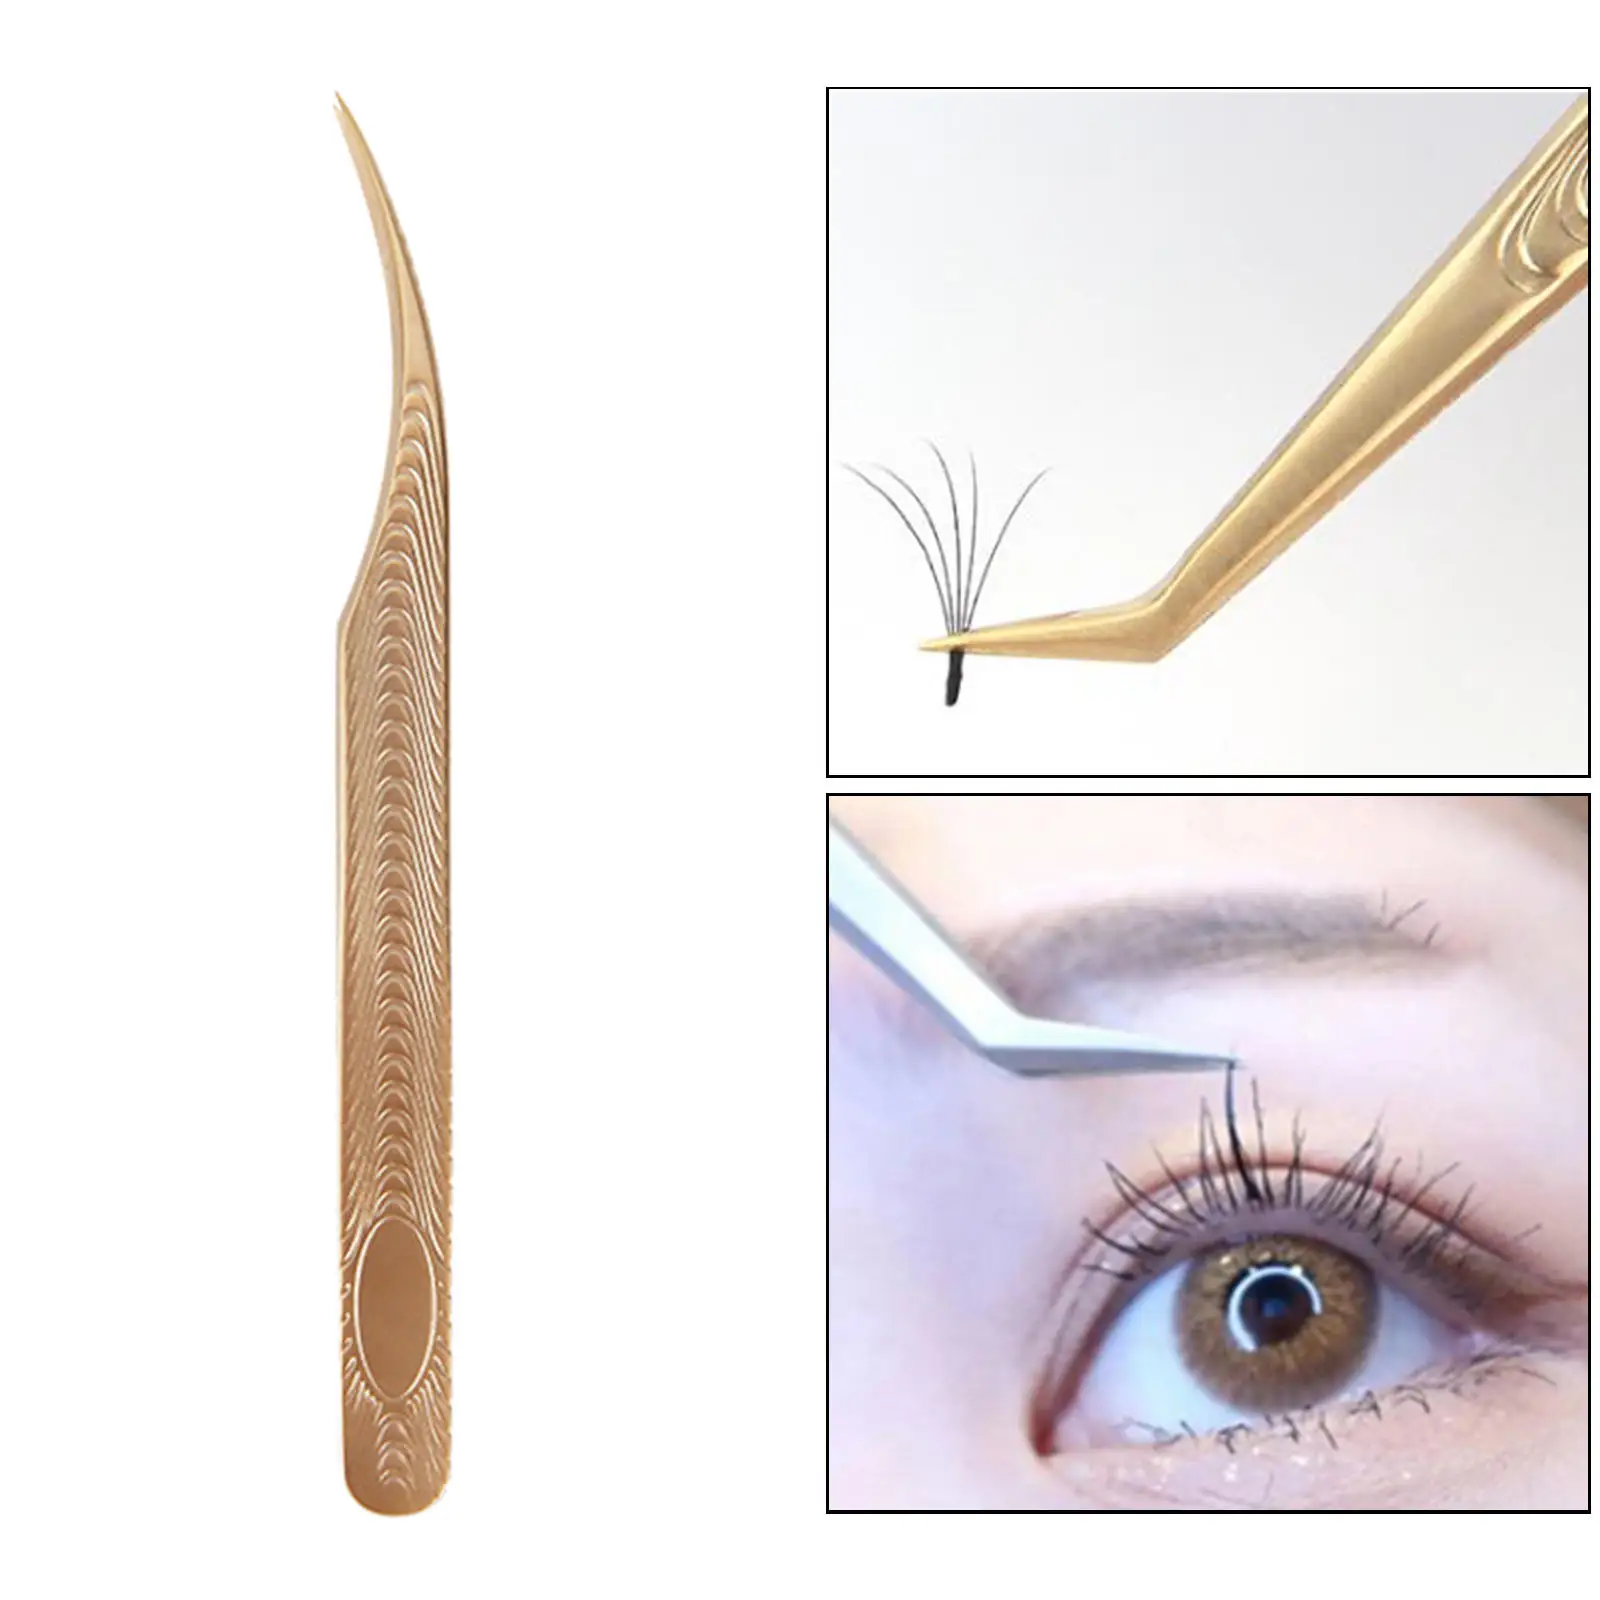 Stainless Steel Eyelash Tweezers Extension Straight and Curved Tip Nippers False Lash Application Tools Lash Extension Supplies